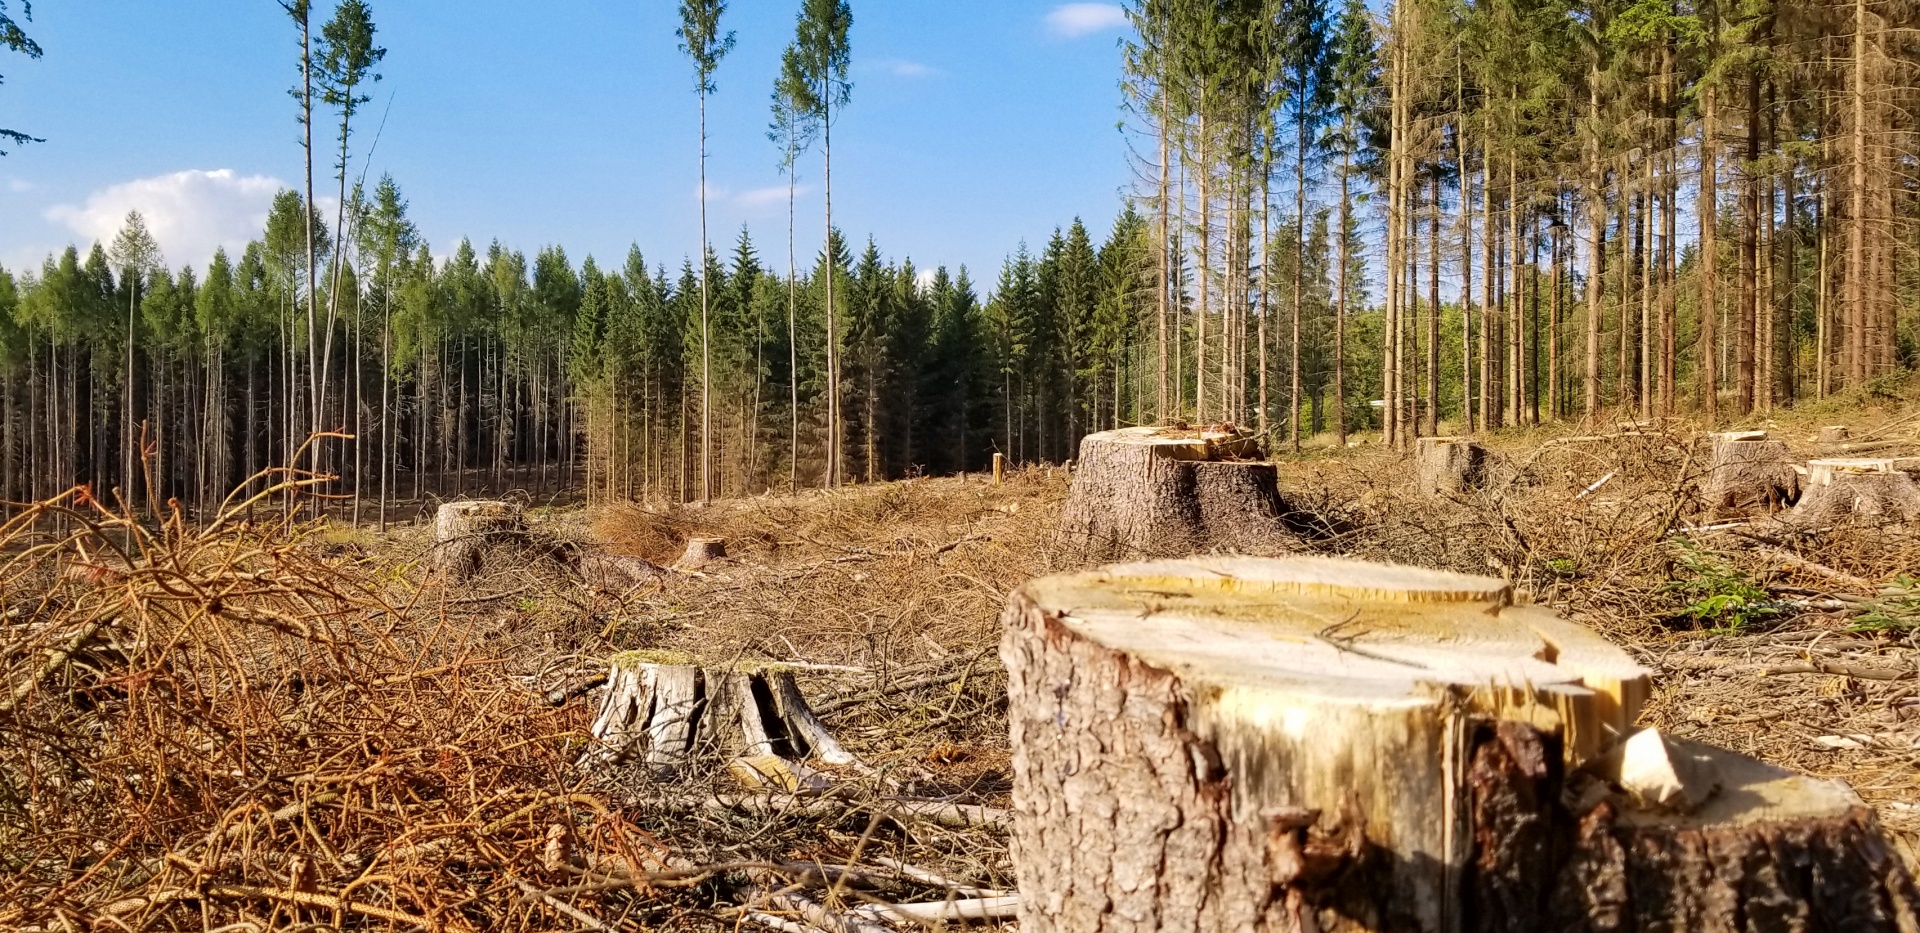 a picture of stumps left from cut down trees in the foreground and standing trees in the background